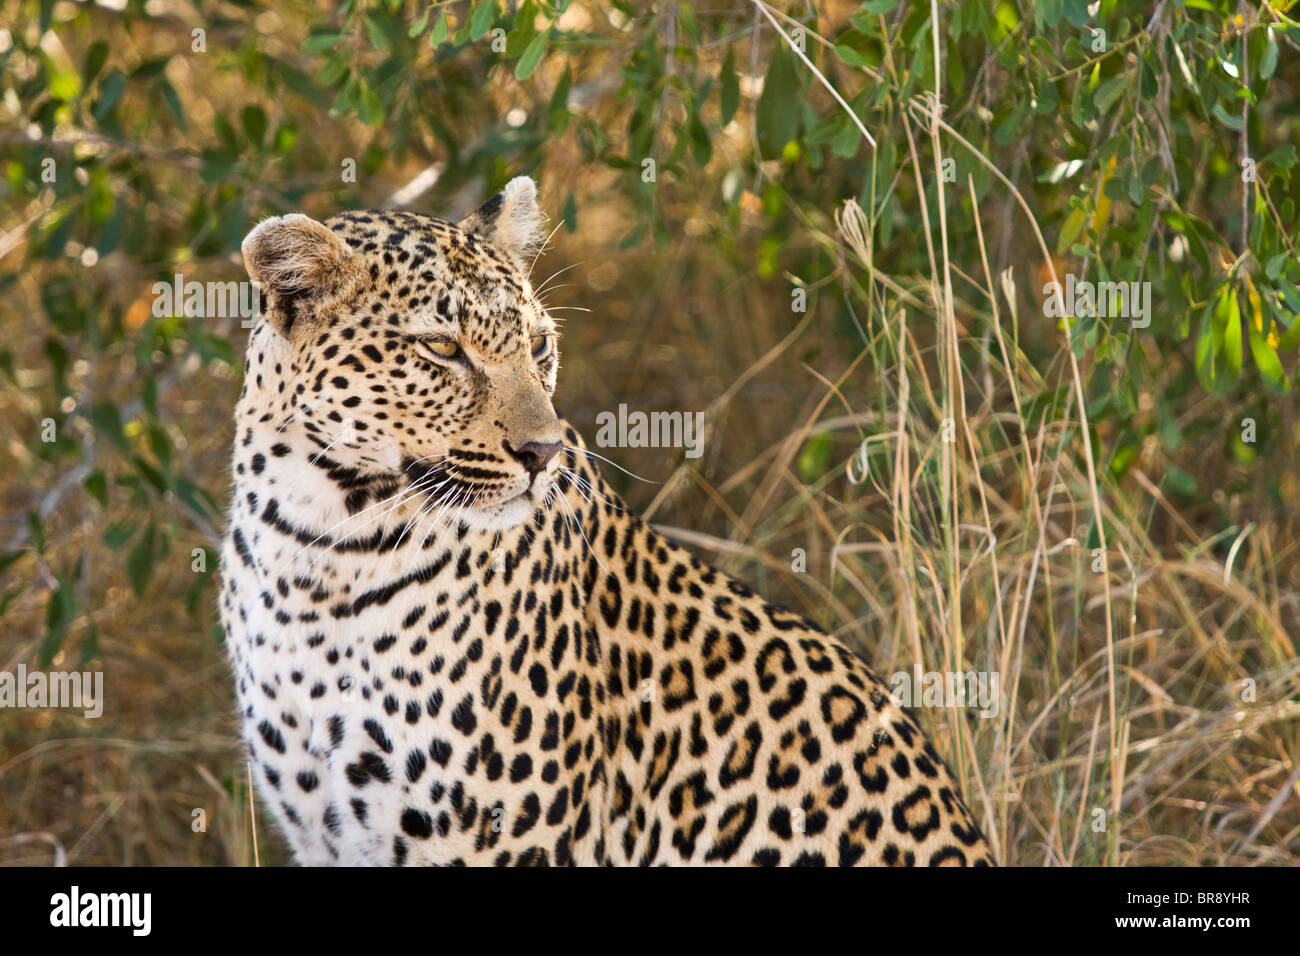 A Leopard, Panthera pardus, sitting in Kruger National Park, South Africa Stock Photo